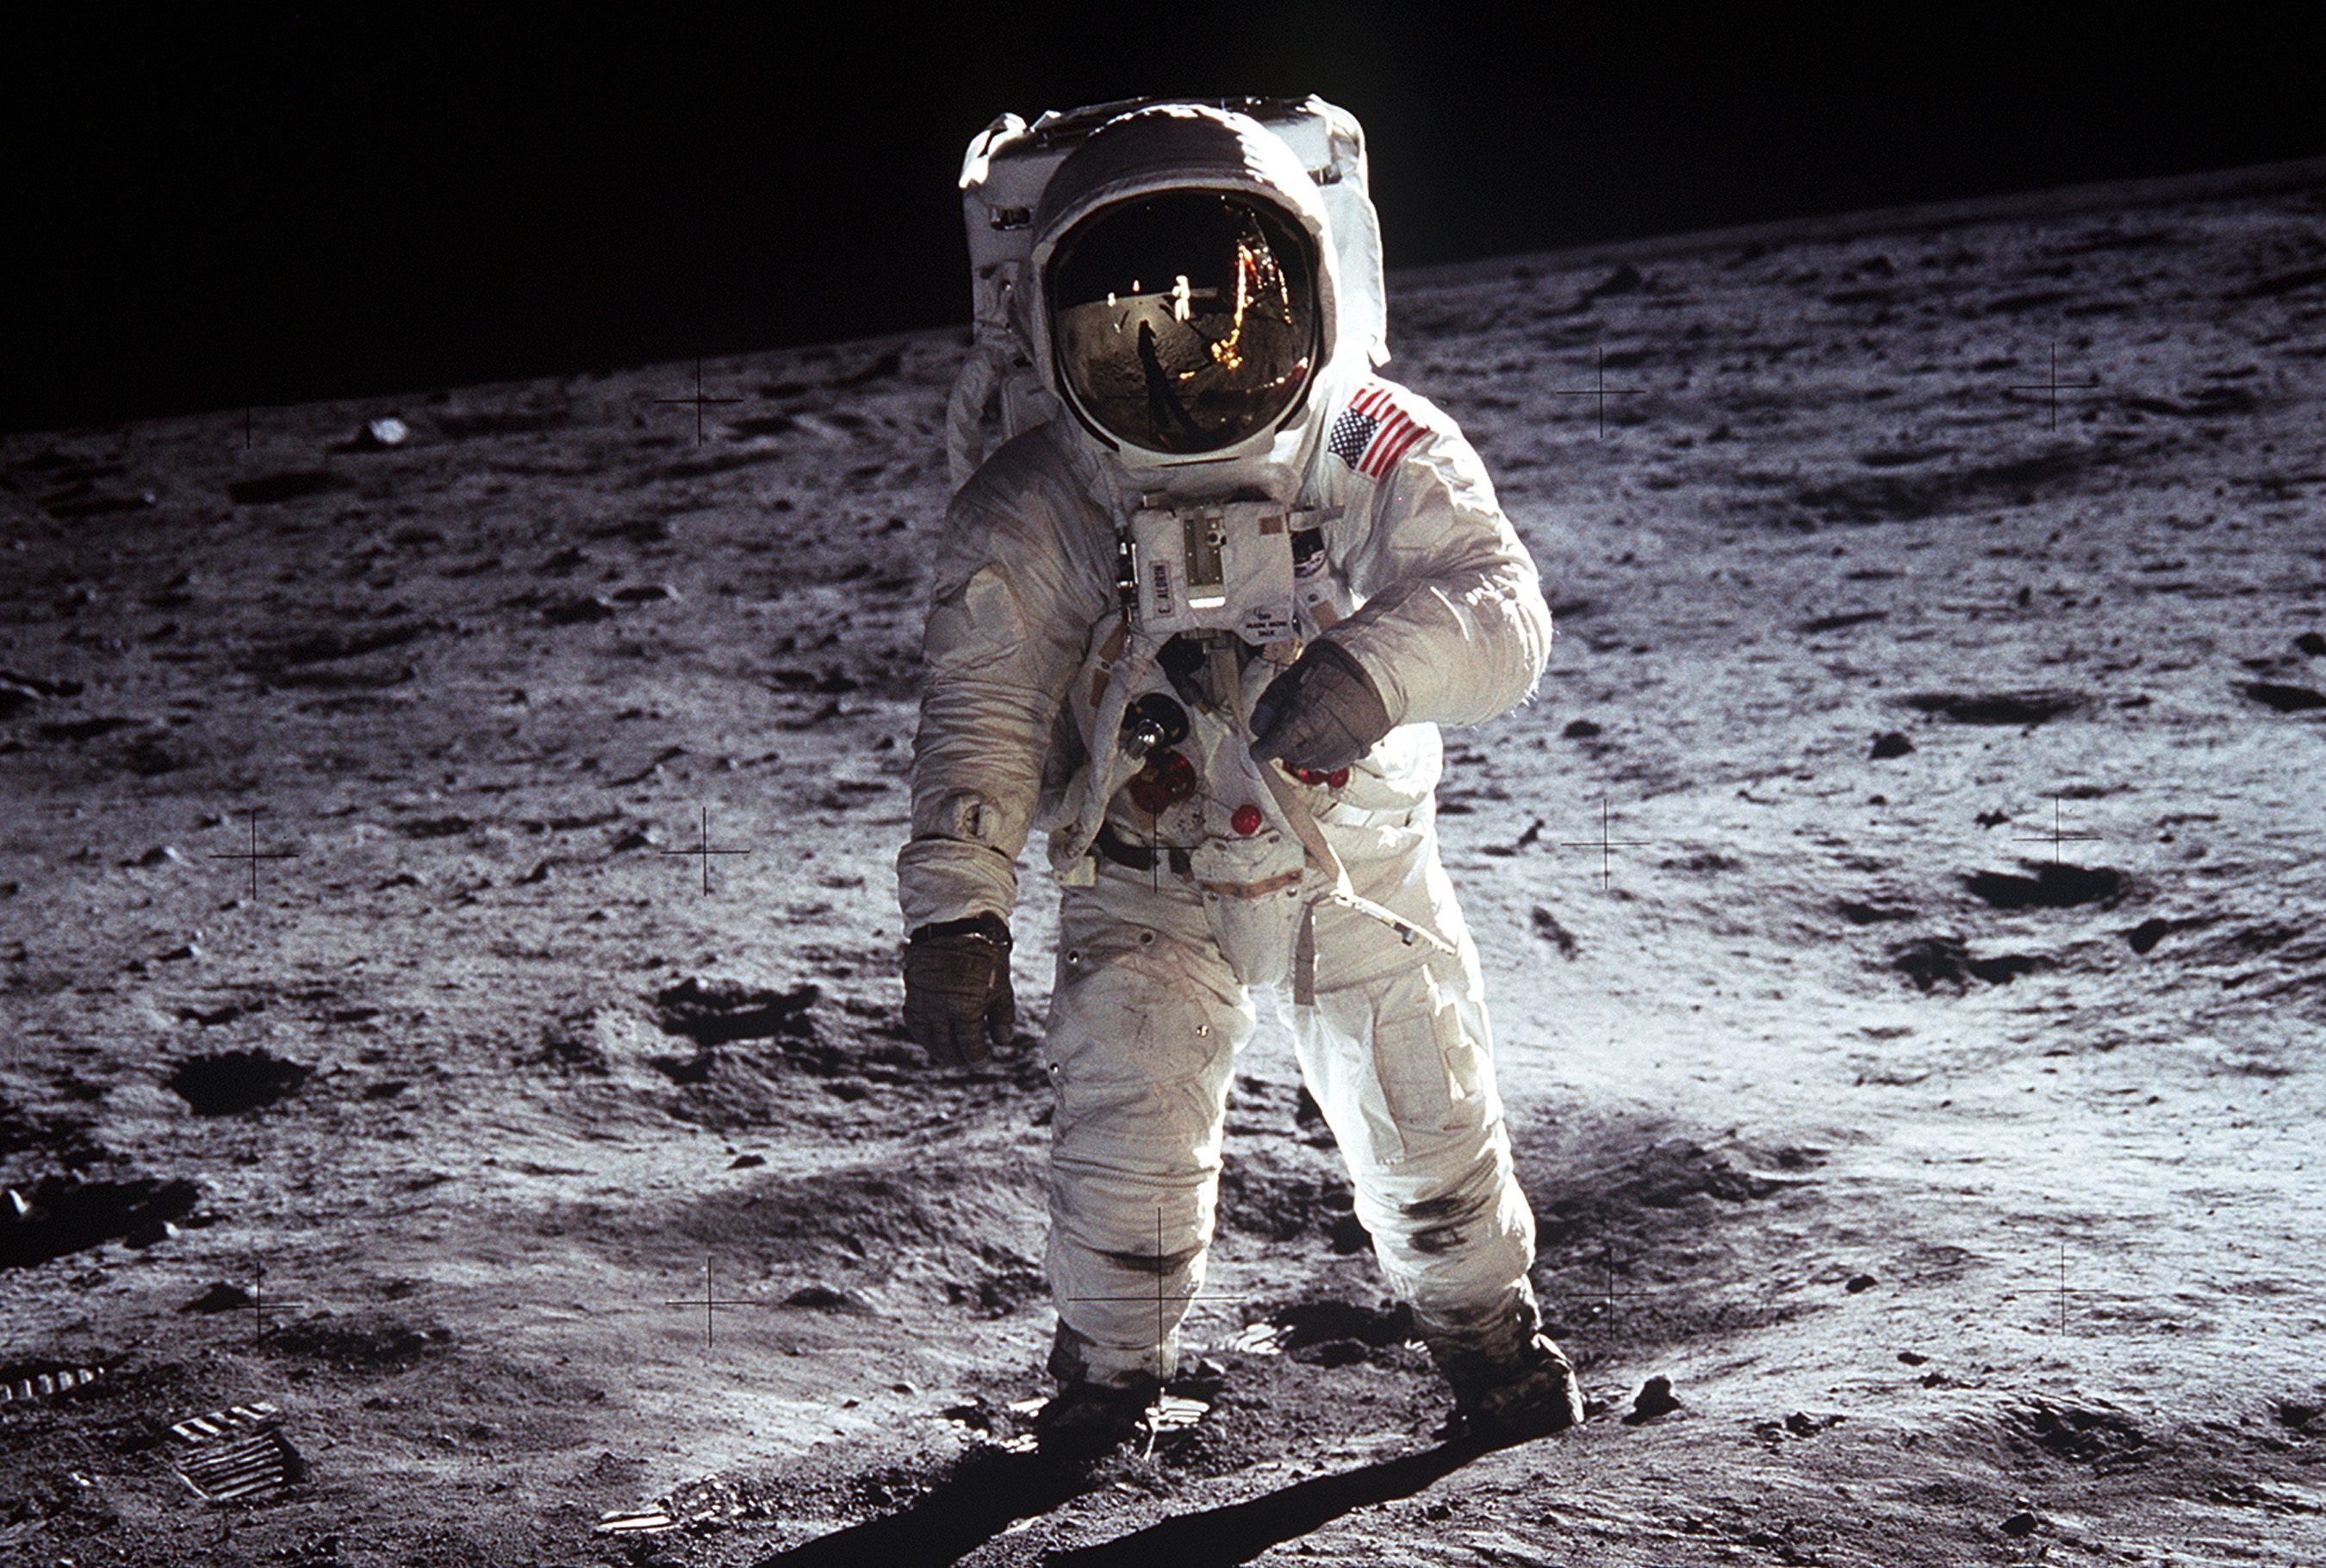 Buzz Aldrin walking on the surface of the moon, July 20, 1969.